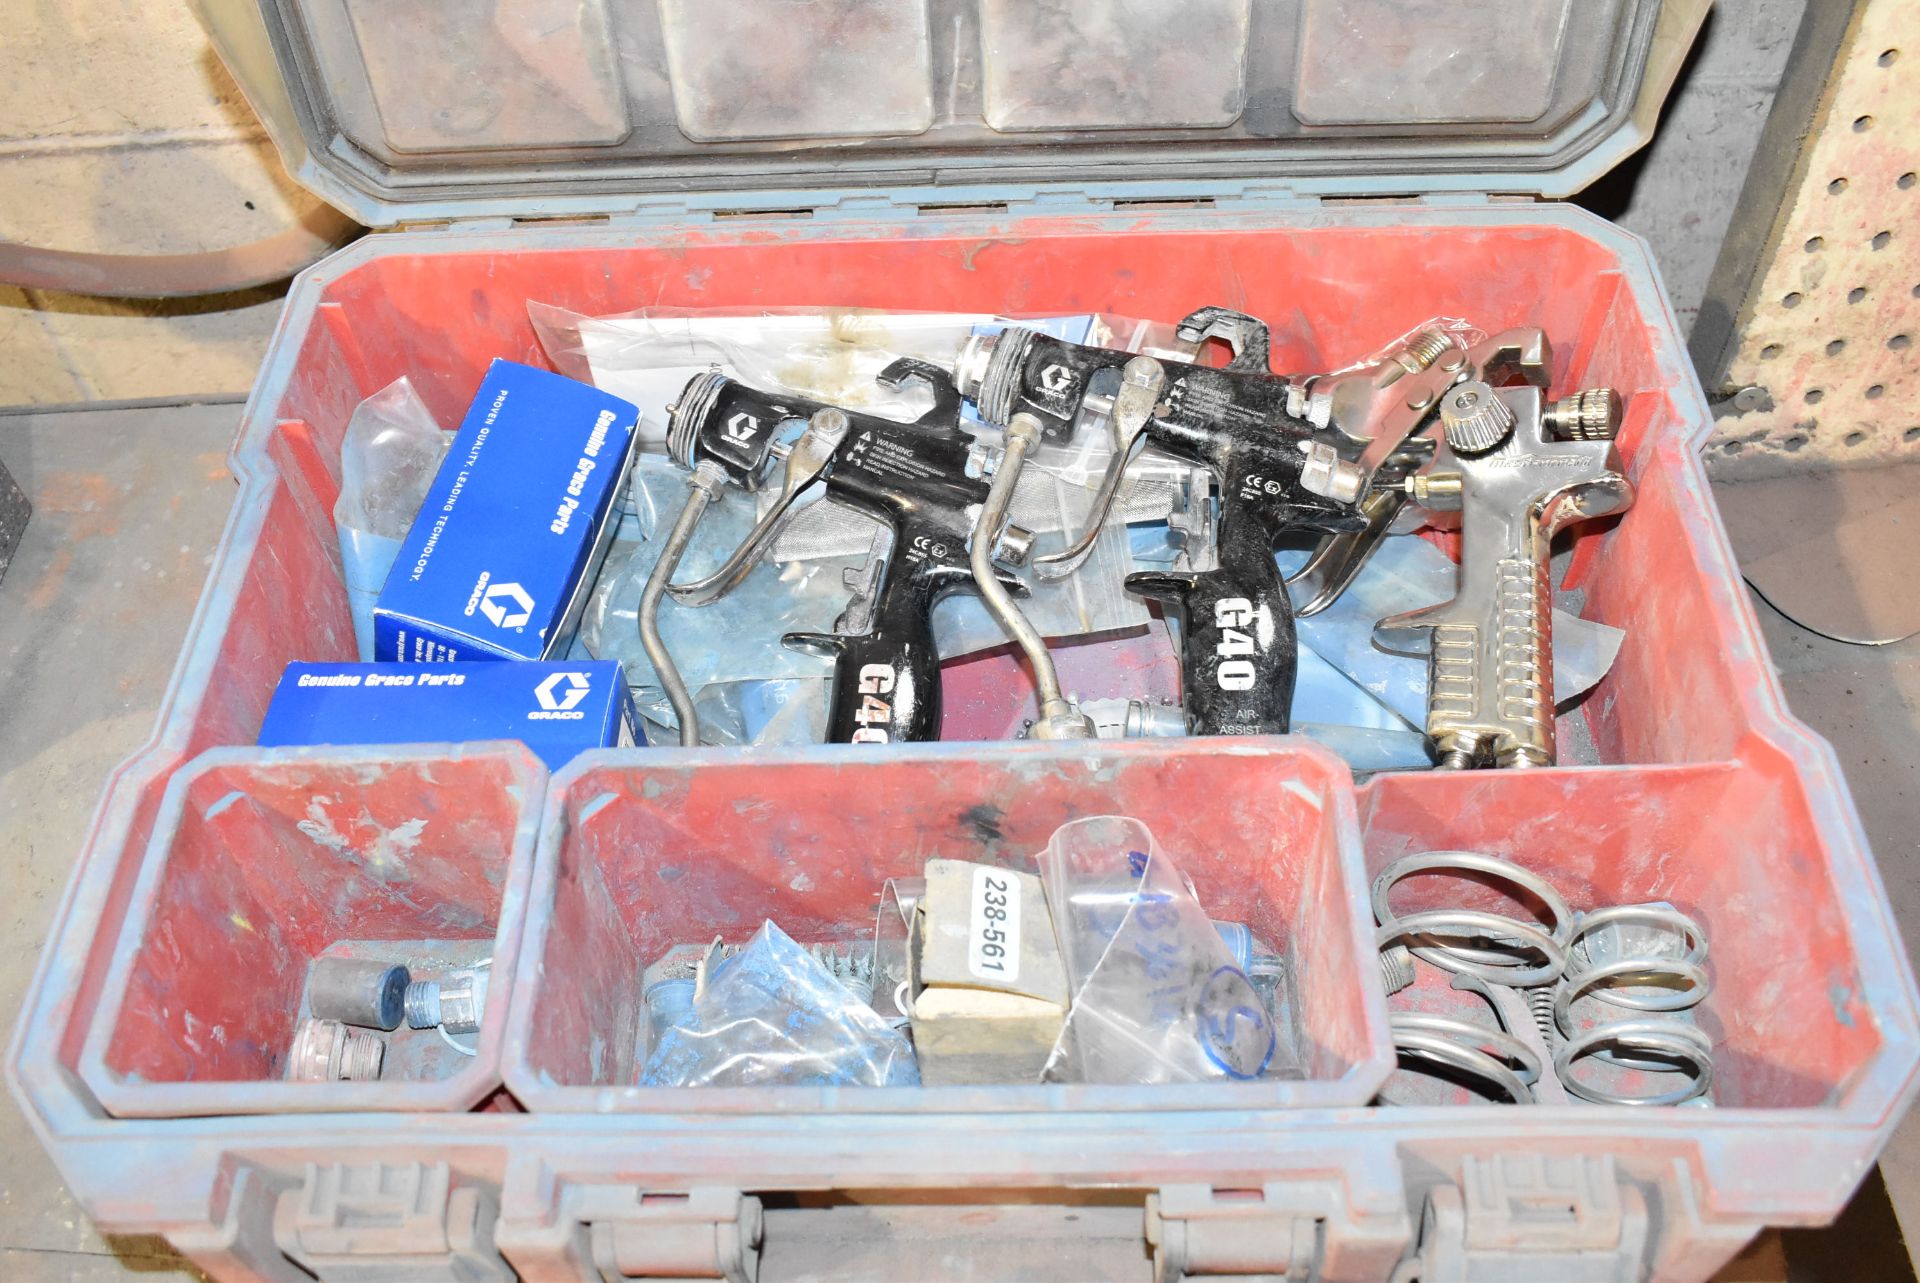 LOT/ PAINTING SUPPLIES CONSISTING OF PAINT MIXER, GUNS AND ACCESSORIES - Image 2 of 2